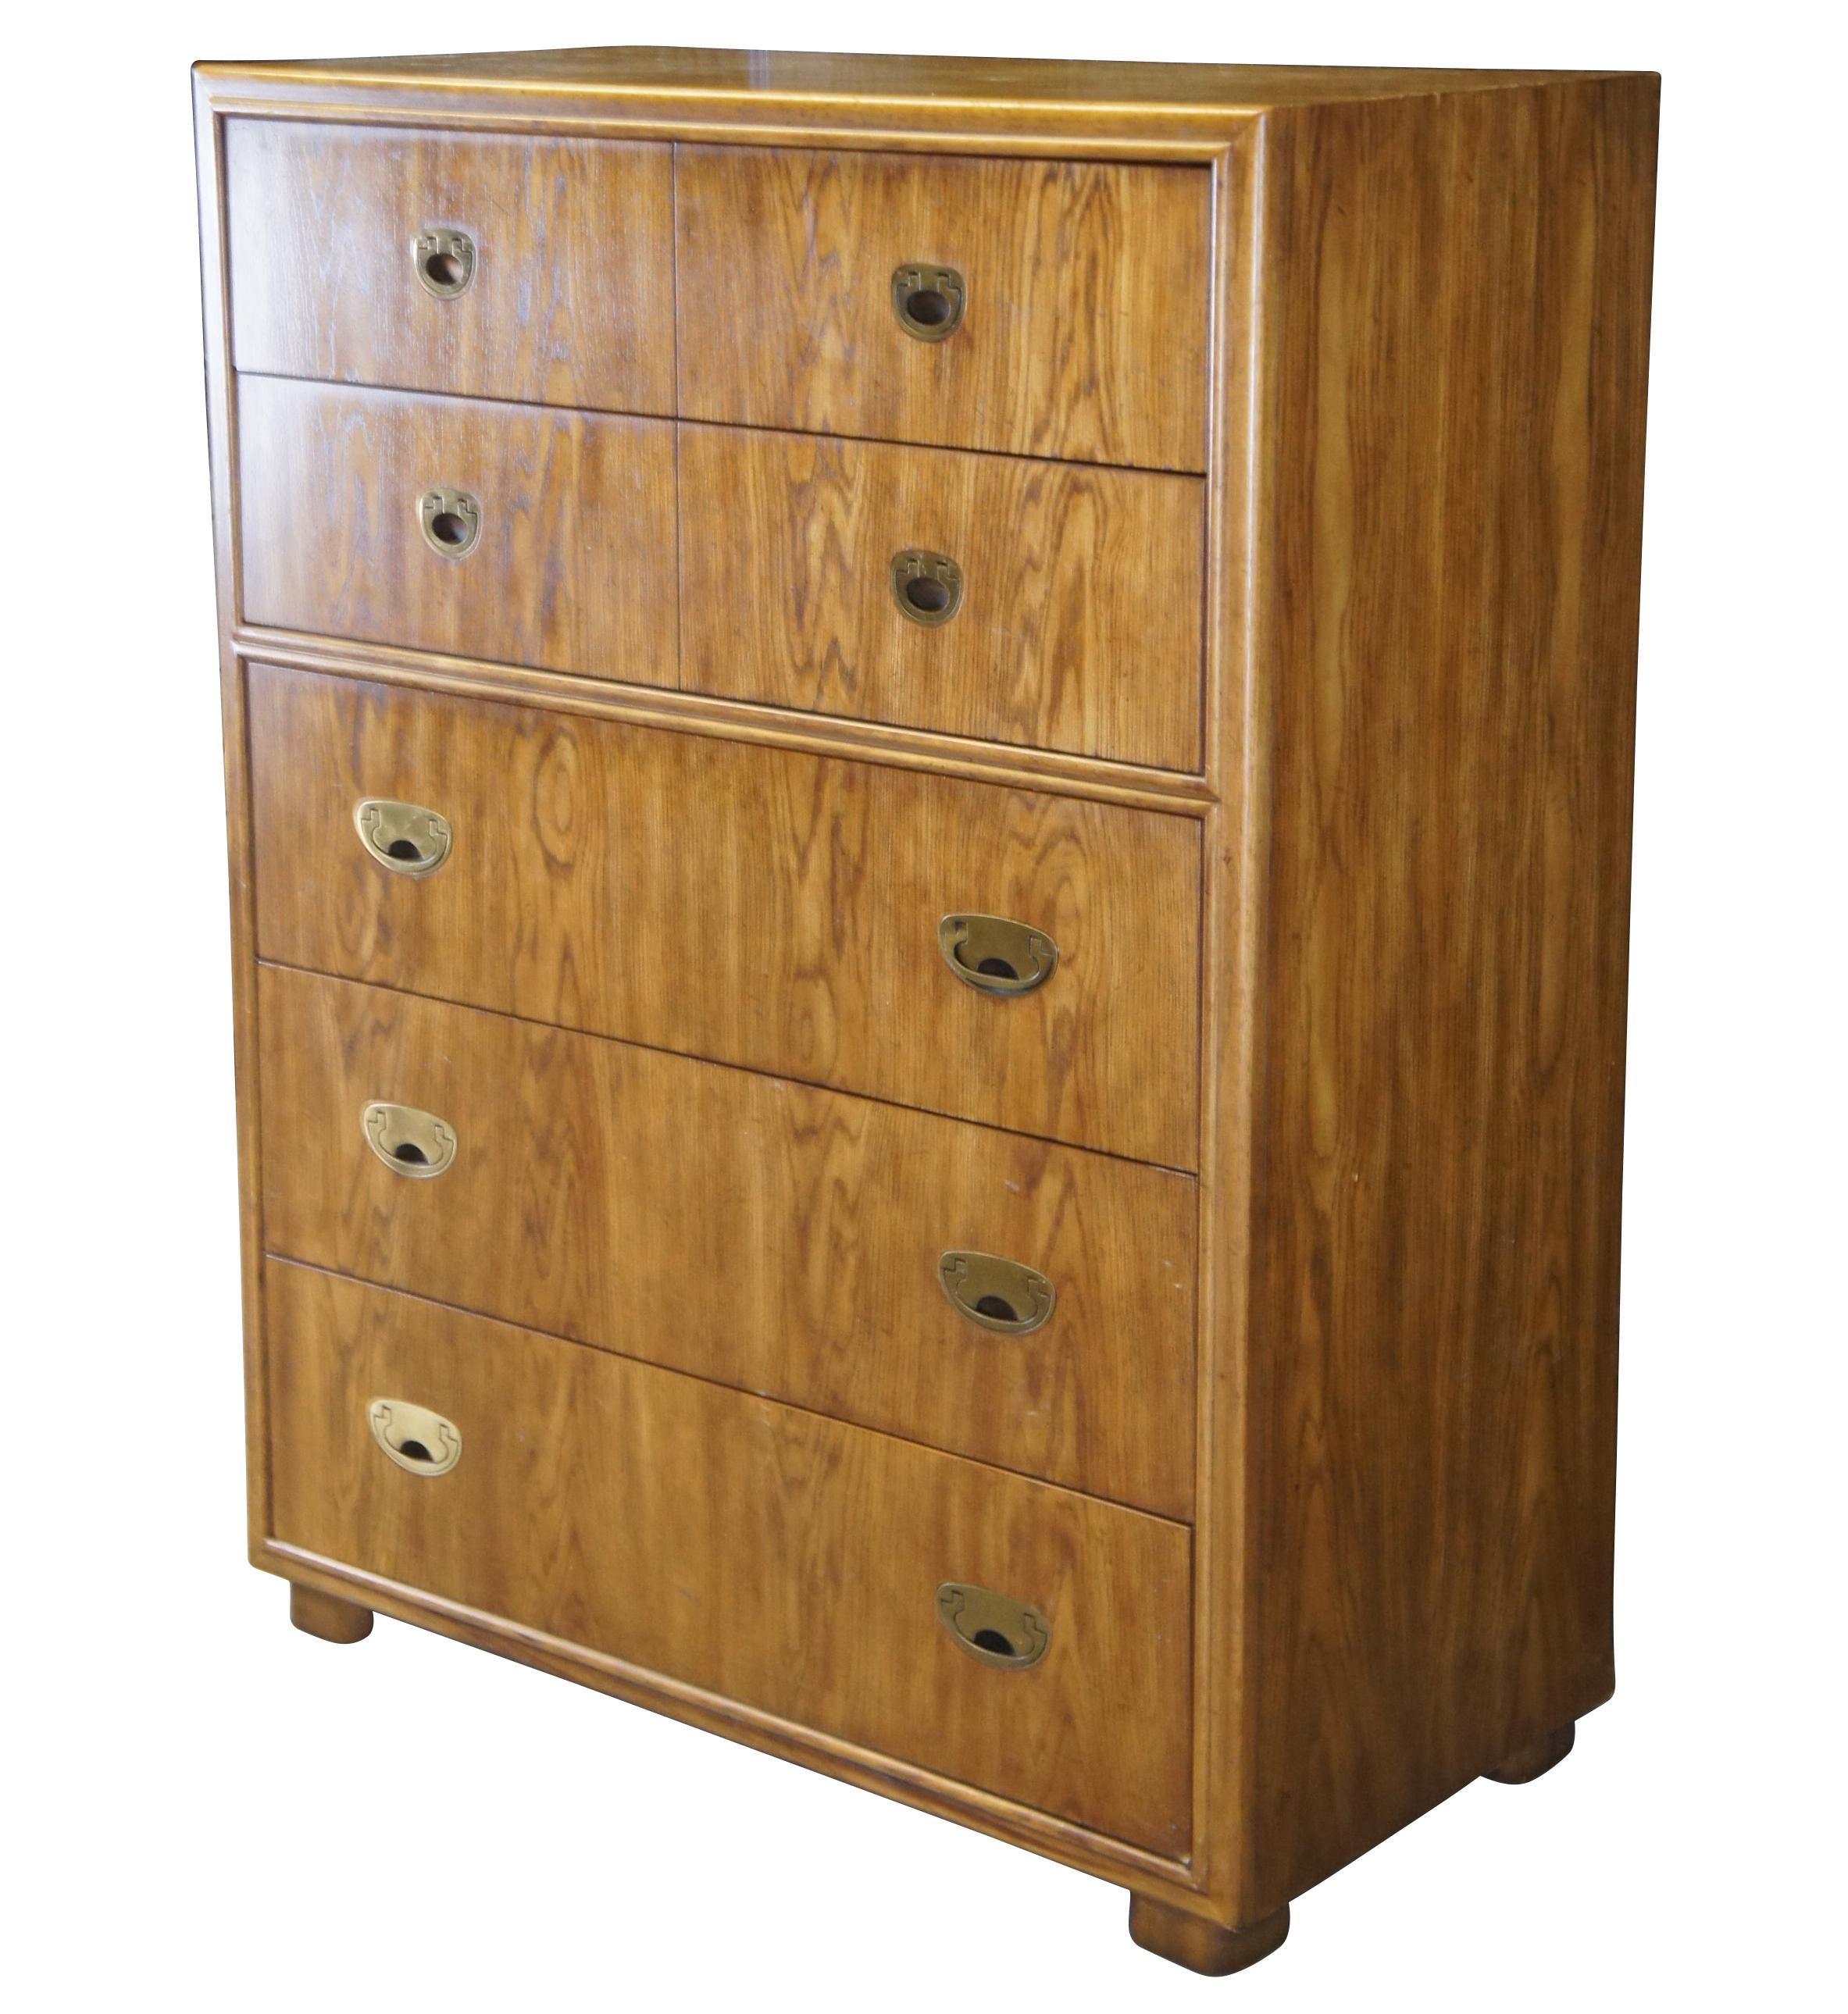 Drexel Heritage Passage Collection Highboy Dresser, circa 1988, no 915-410-2.  Features a rectangular frame made from oak with 5 dovetailed drawers featuring inset brass drawer pulls.  A great addition to any mid century modern space.

Dimensions: